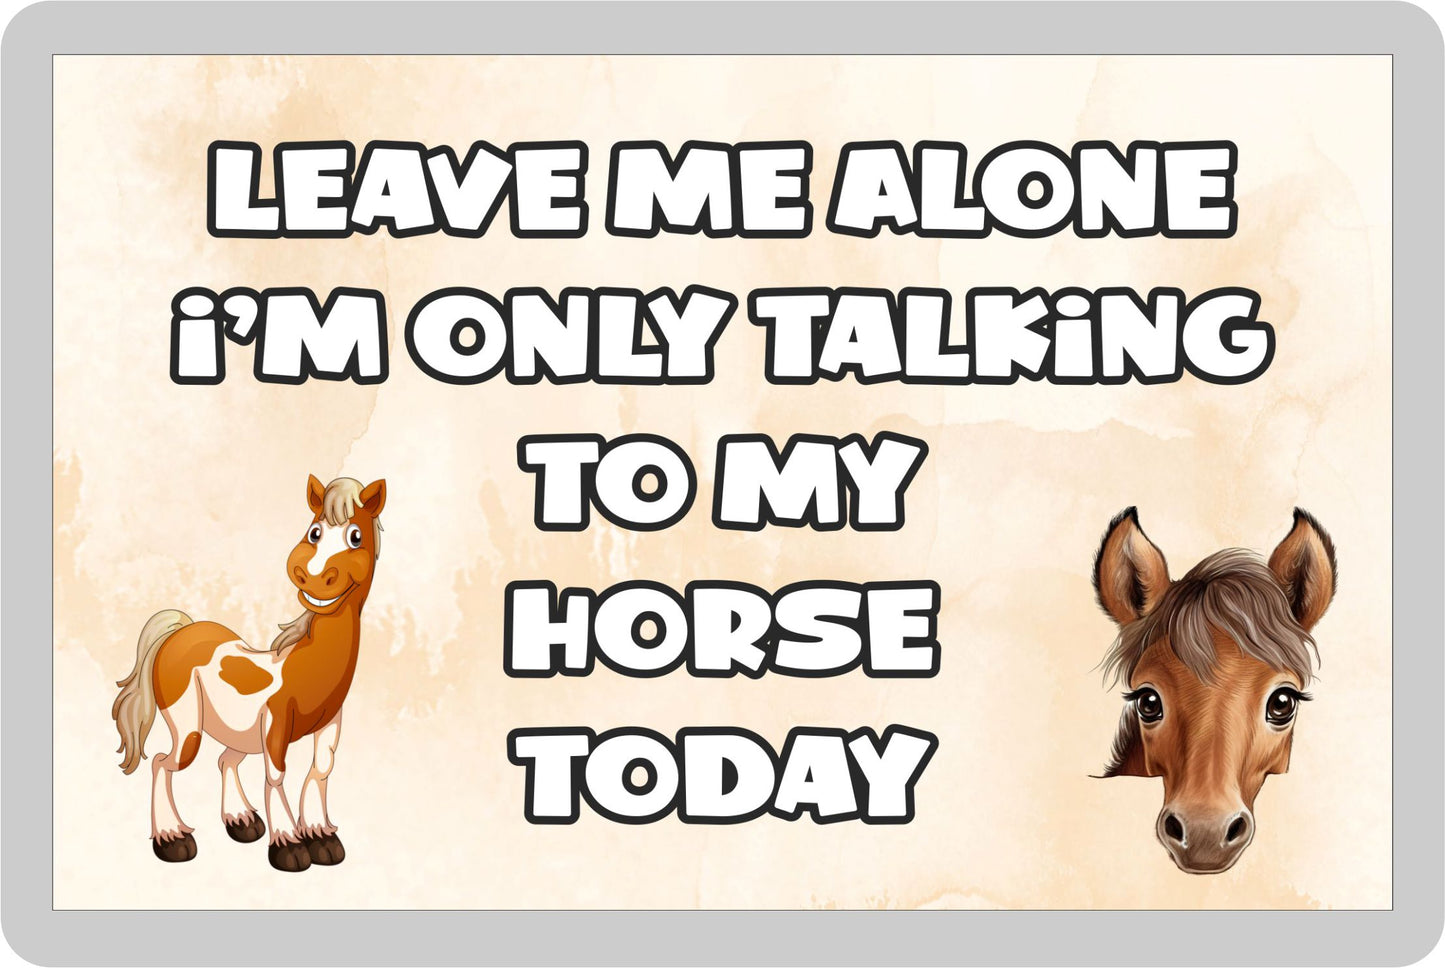 Horse Fridge Magnet Gift - Leave Me Alone I'm Only Talking To My * Today - Novelty Cute Bird Animal Present